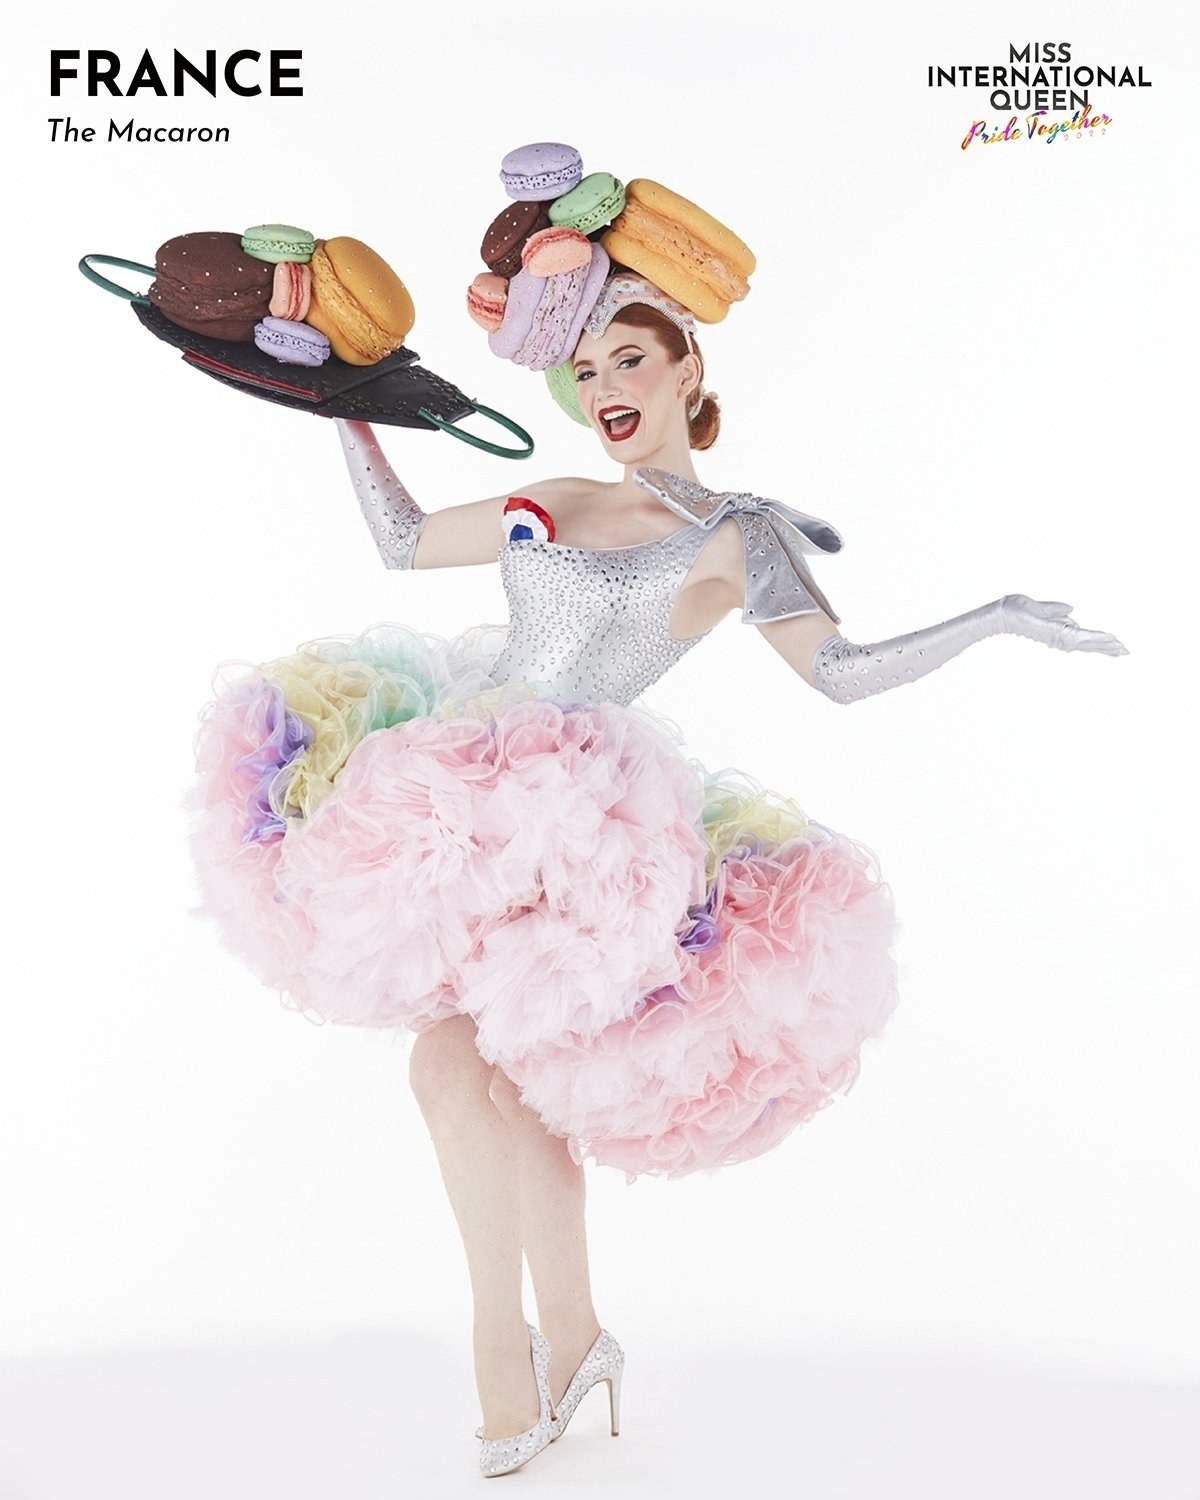 Miss France in an outfit with a macaron hat and holds a macaron tray